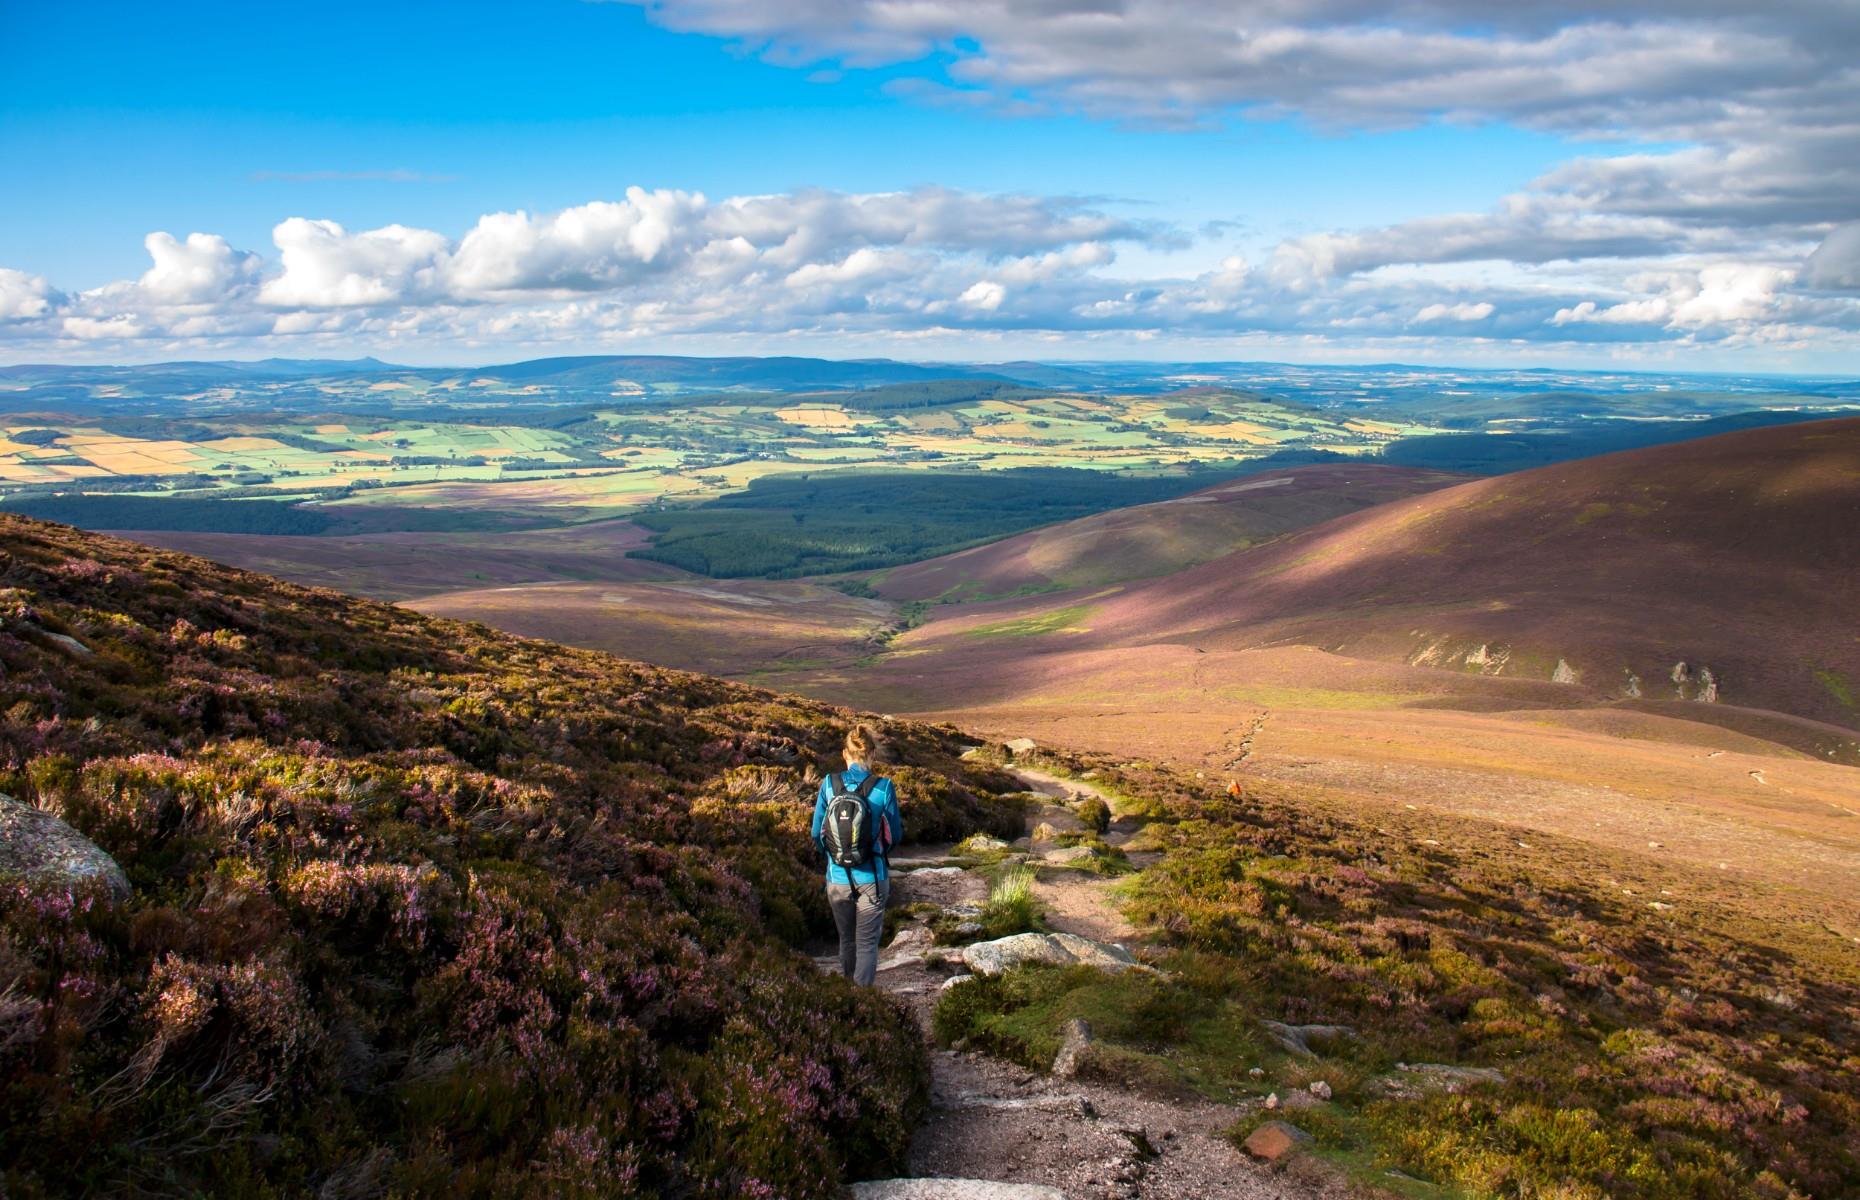 Home to giant, sweeping valleys and wild, open moorlands, the Cairngorms is accessible in 45 minutes by car from Inverness. The park covers a staggering 1,748 square miles (4,527sq km), making it the largest national park in the UK, followed by the Lake District National Park. Wildlife lovers, take note: it’s home to 25% of the UK’s rare and endangered species.